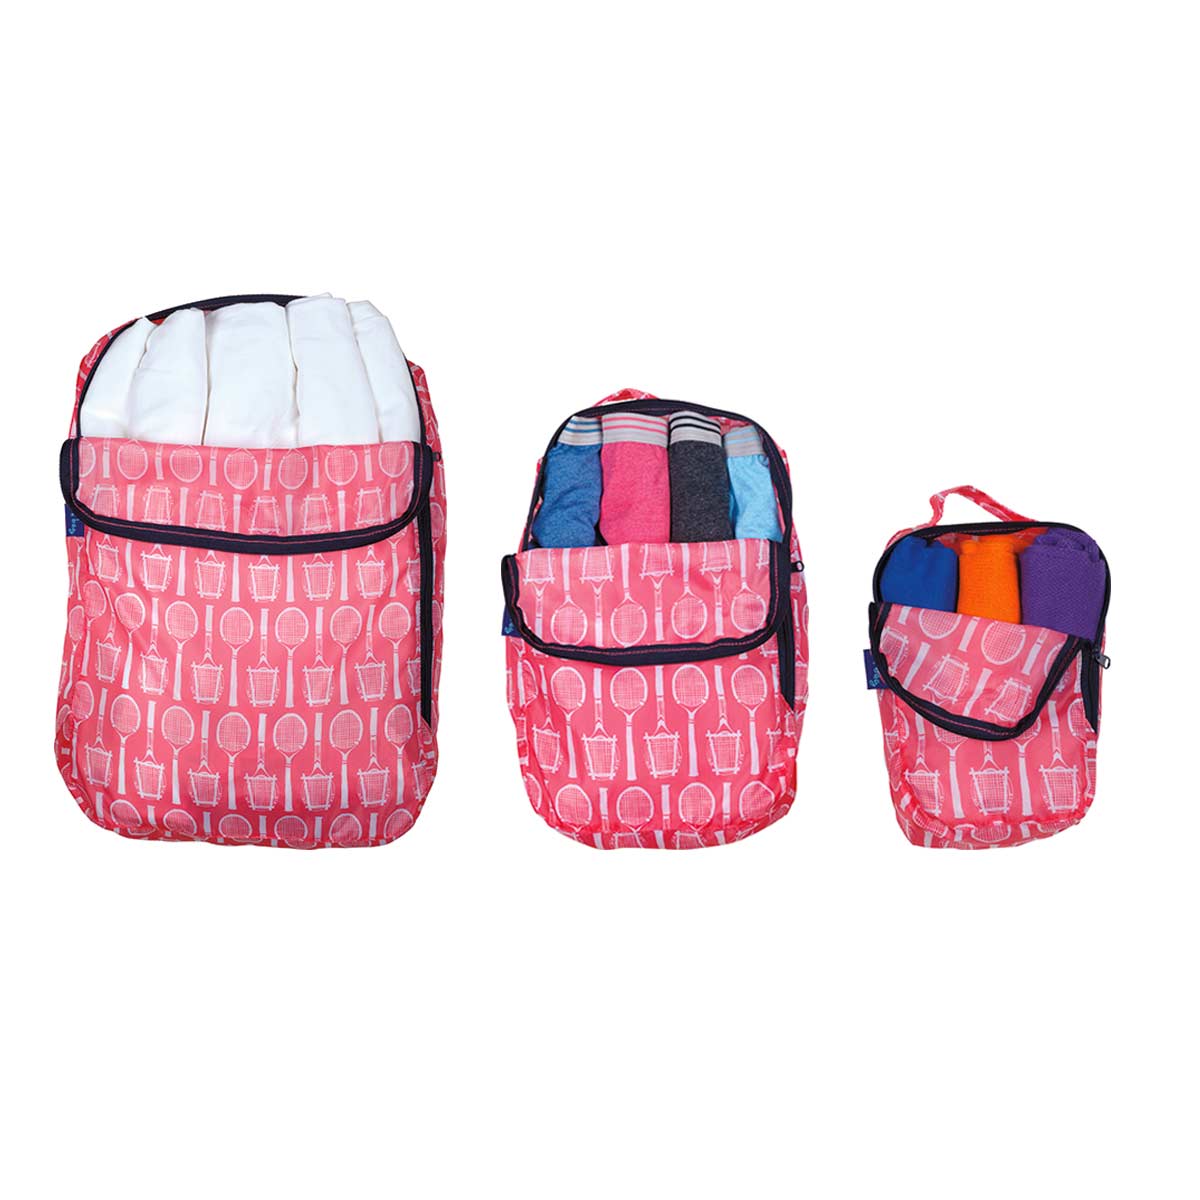 a set of 3 pink travel cubes with a tennis racket print